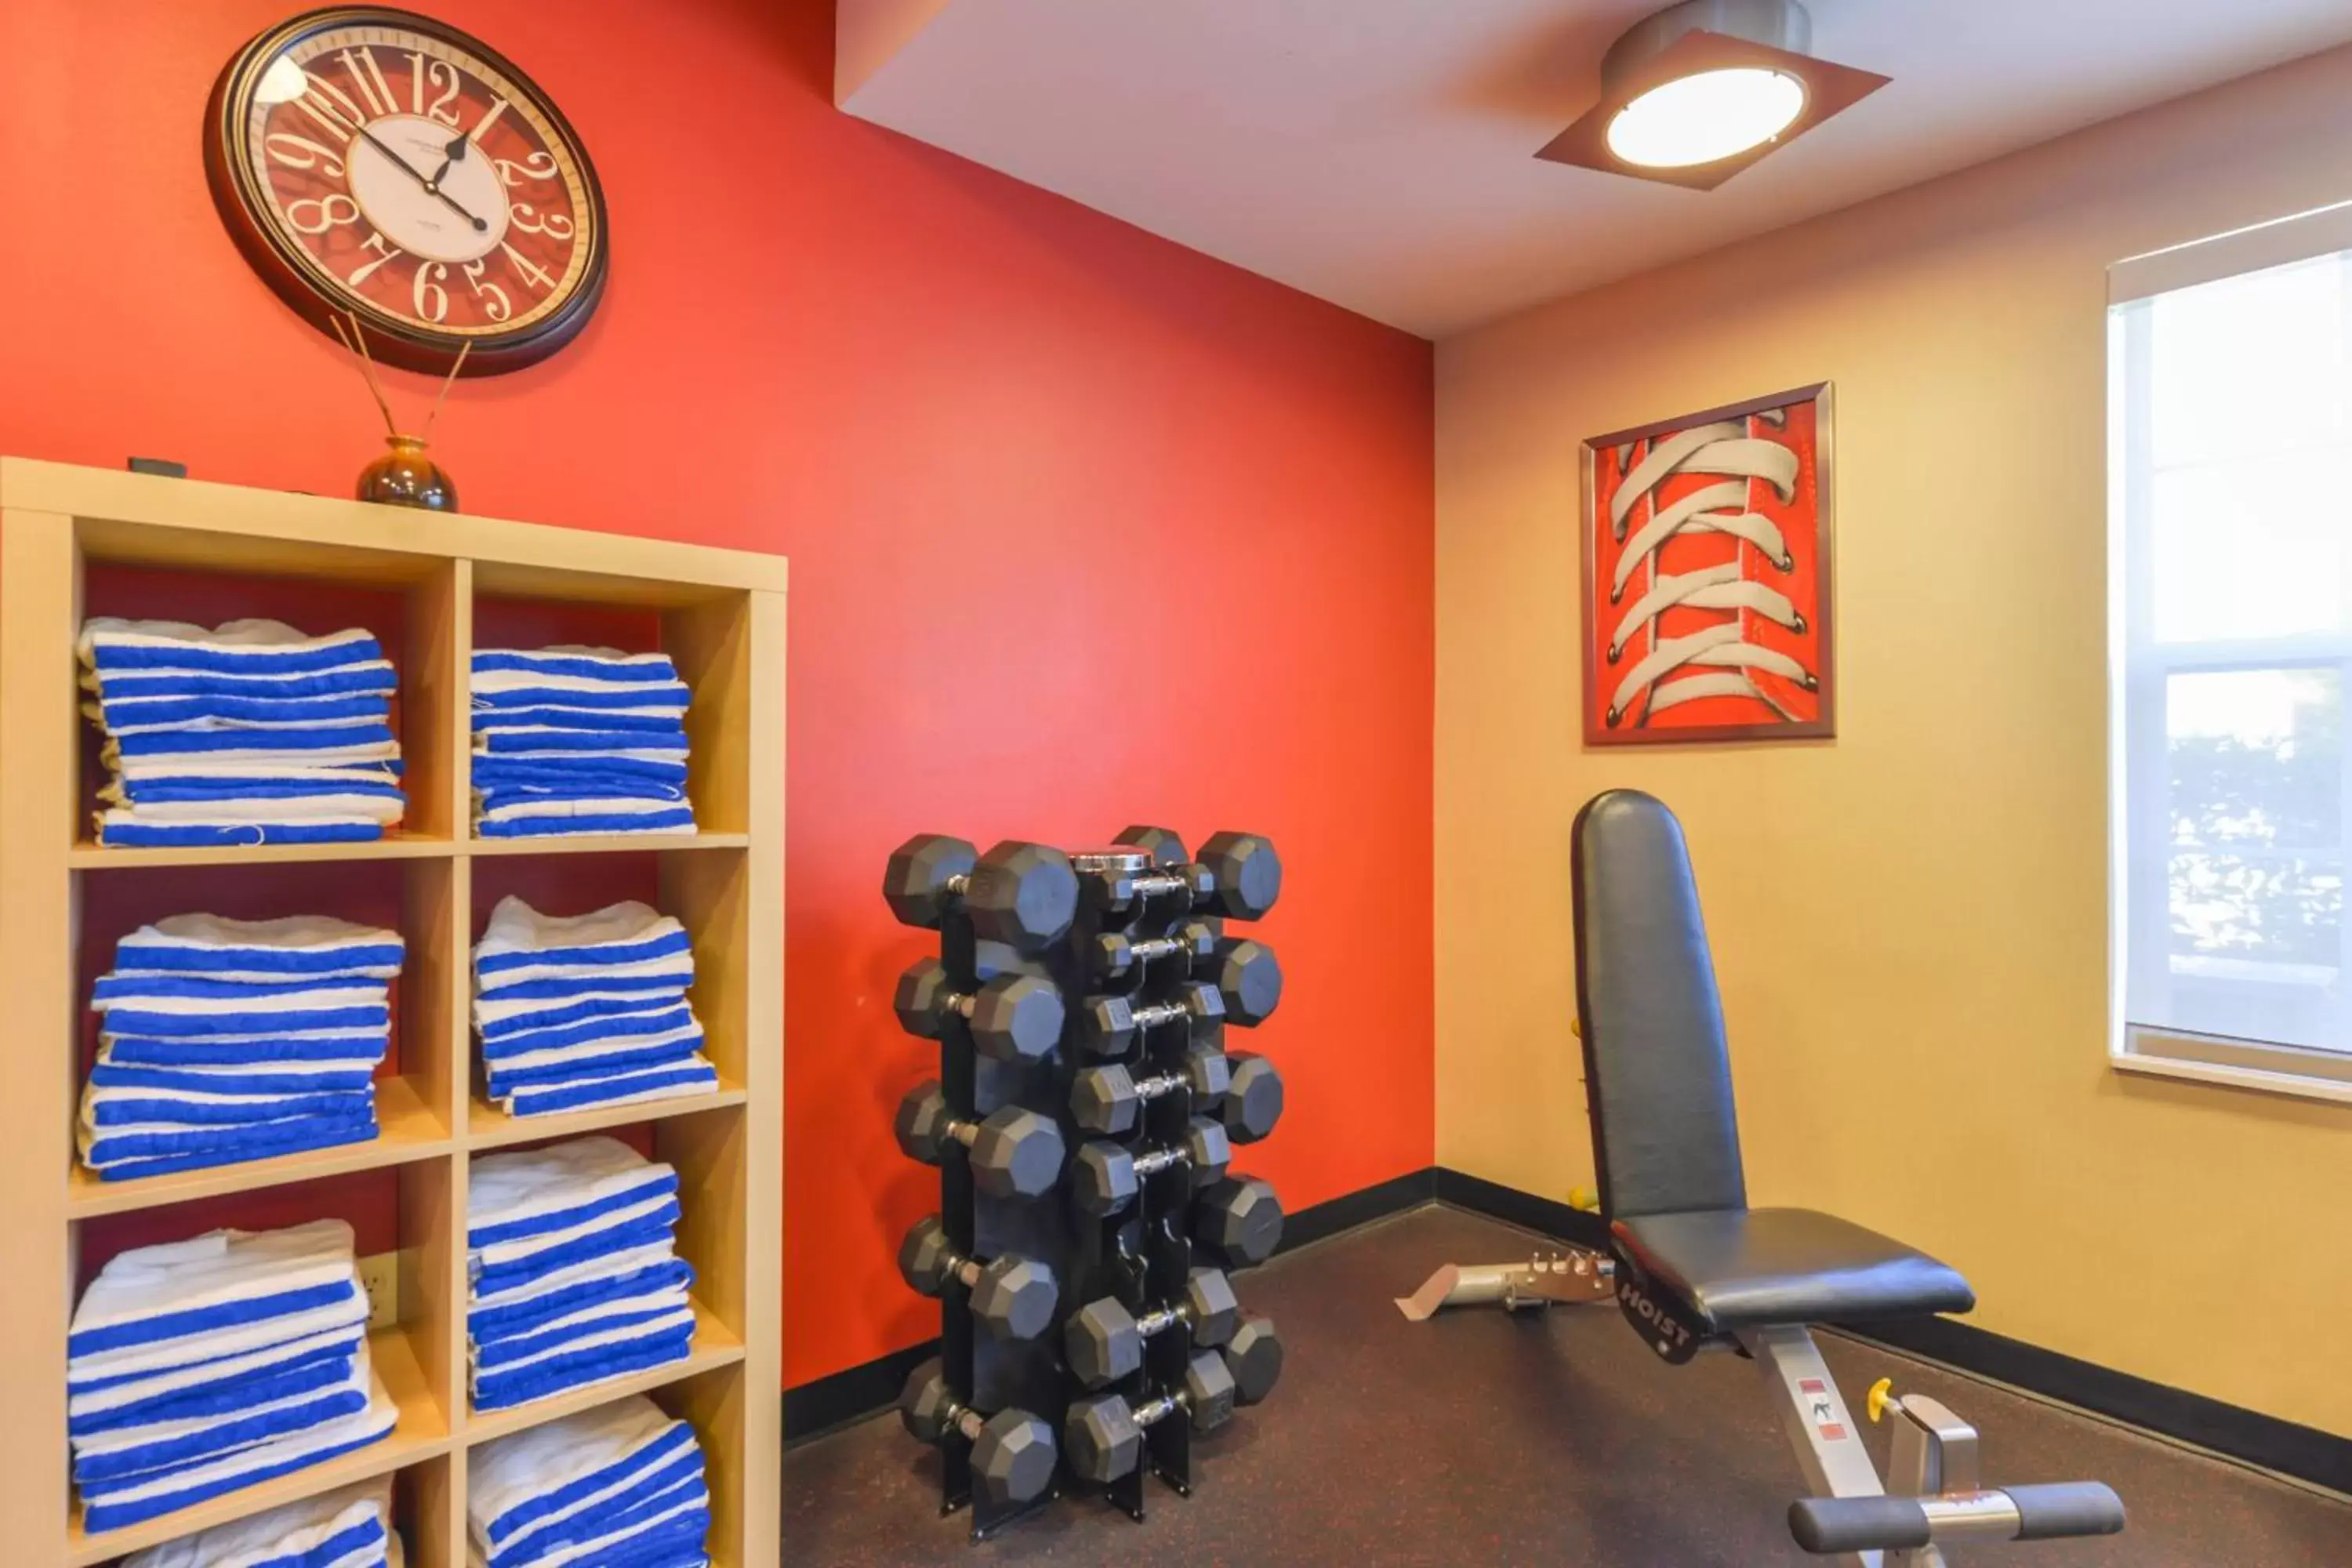 Fitness centre/facilities, Fitness Center/Facilities in TownePlace Suites Arundel Mills BWI Airport